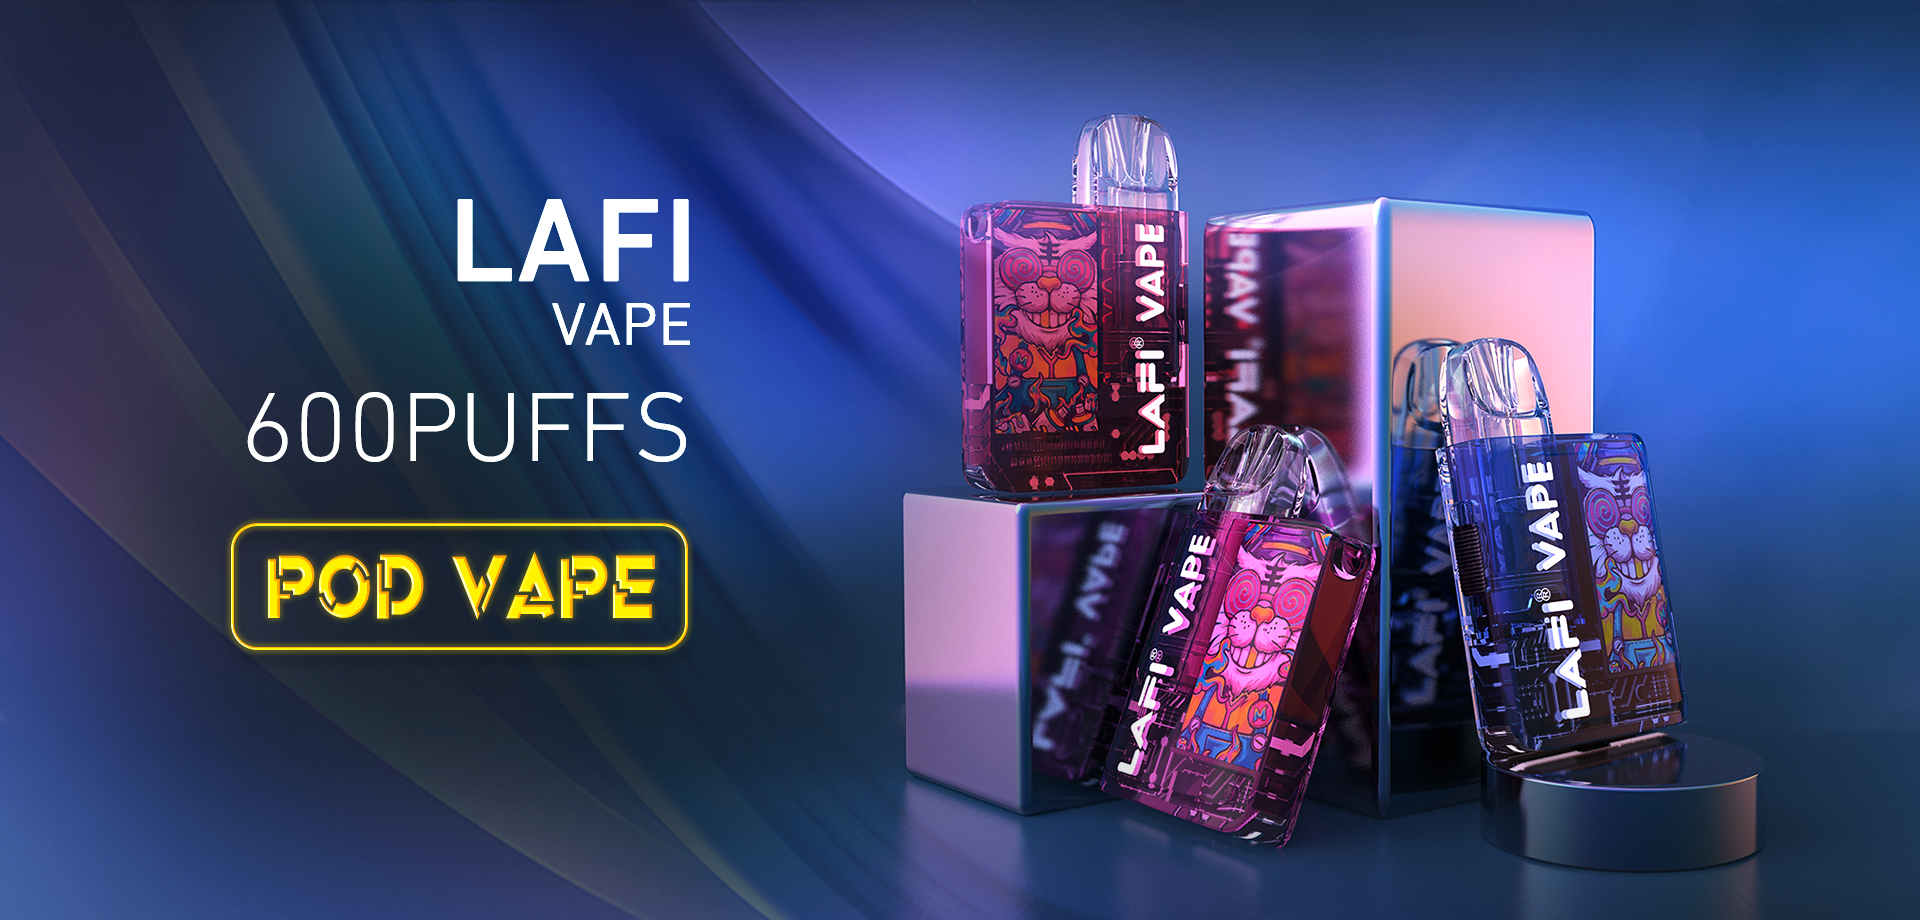 8 Best Vape Brands & Manufacturers - ALD Vapor 1. ALD – Best Price and high quality · 2. Voopoo – Most Innovative · 3. Geekvape – Most Durable · 4. JUUL – Most Convenient · 5. SMOK – Most Versatile.6. Innokin – Best For New Vapers.7. Vaporesso – Best Value.8. LAFI VAPE – Most Stylish